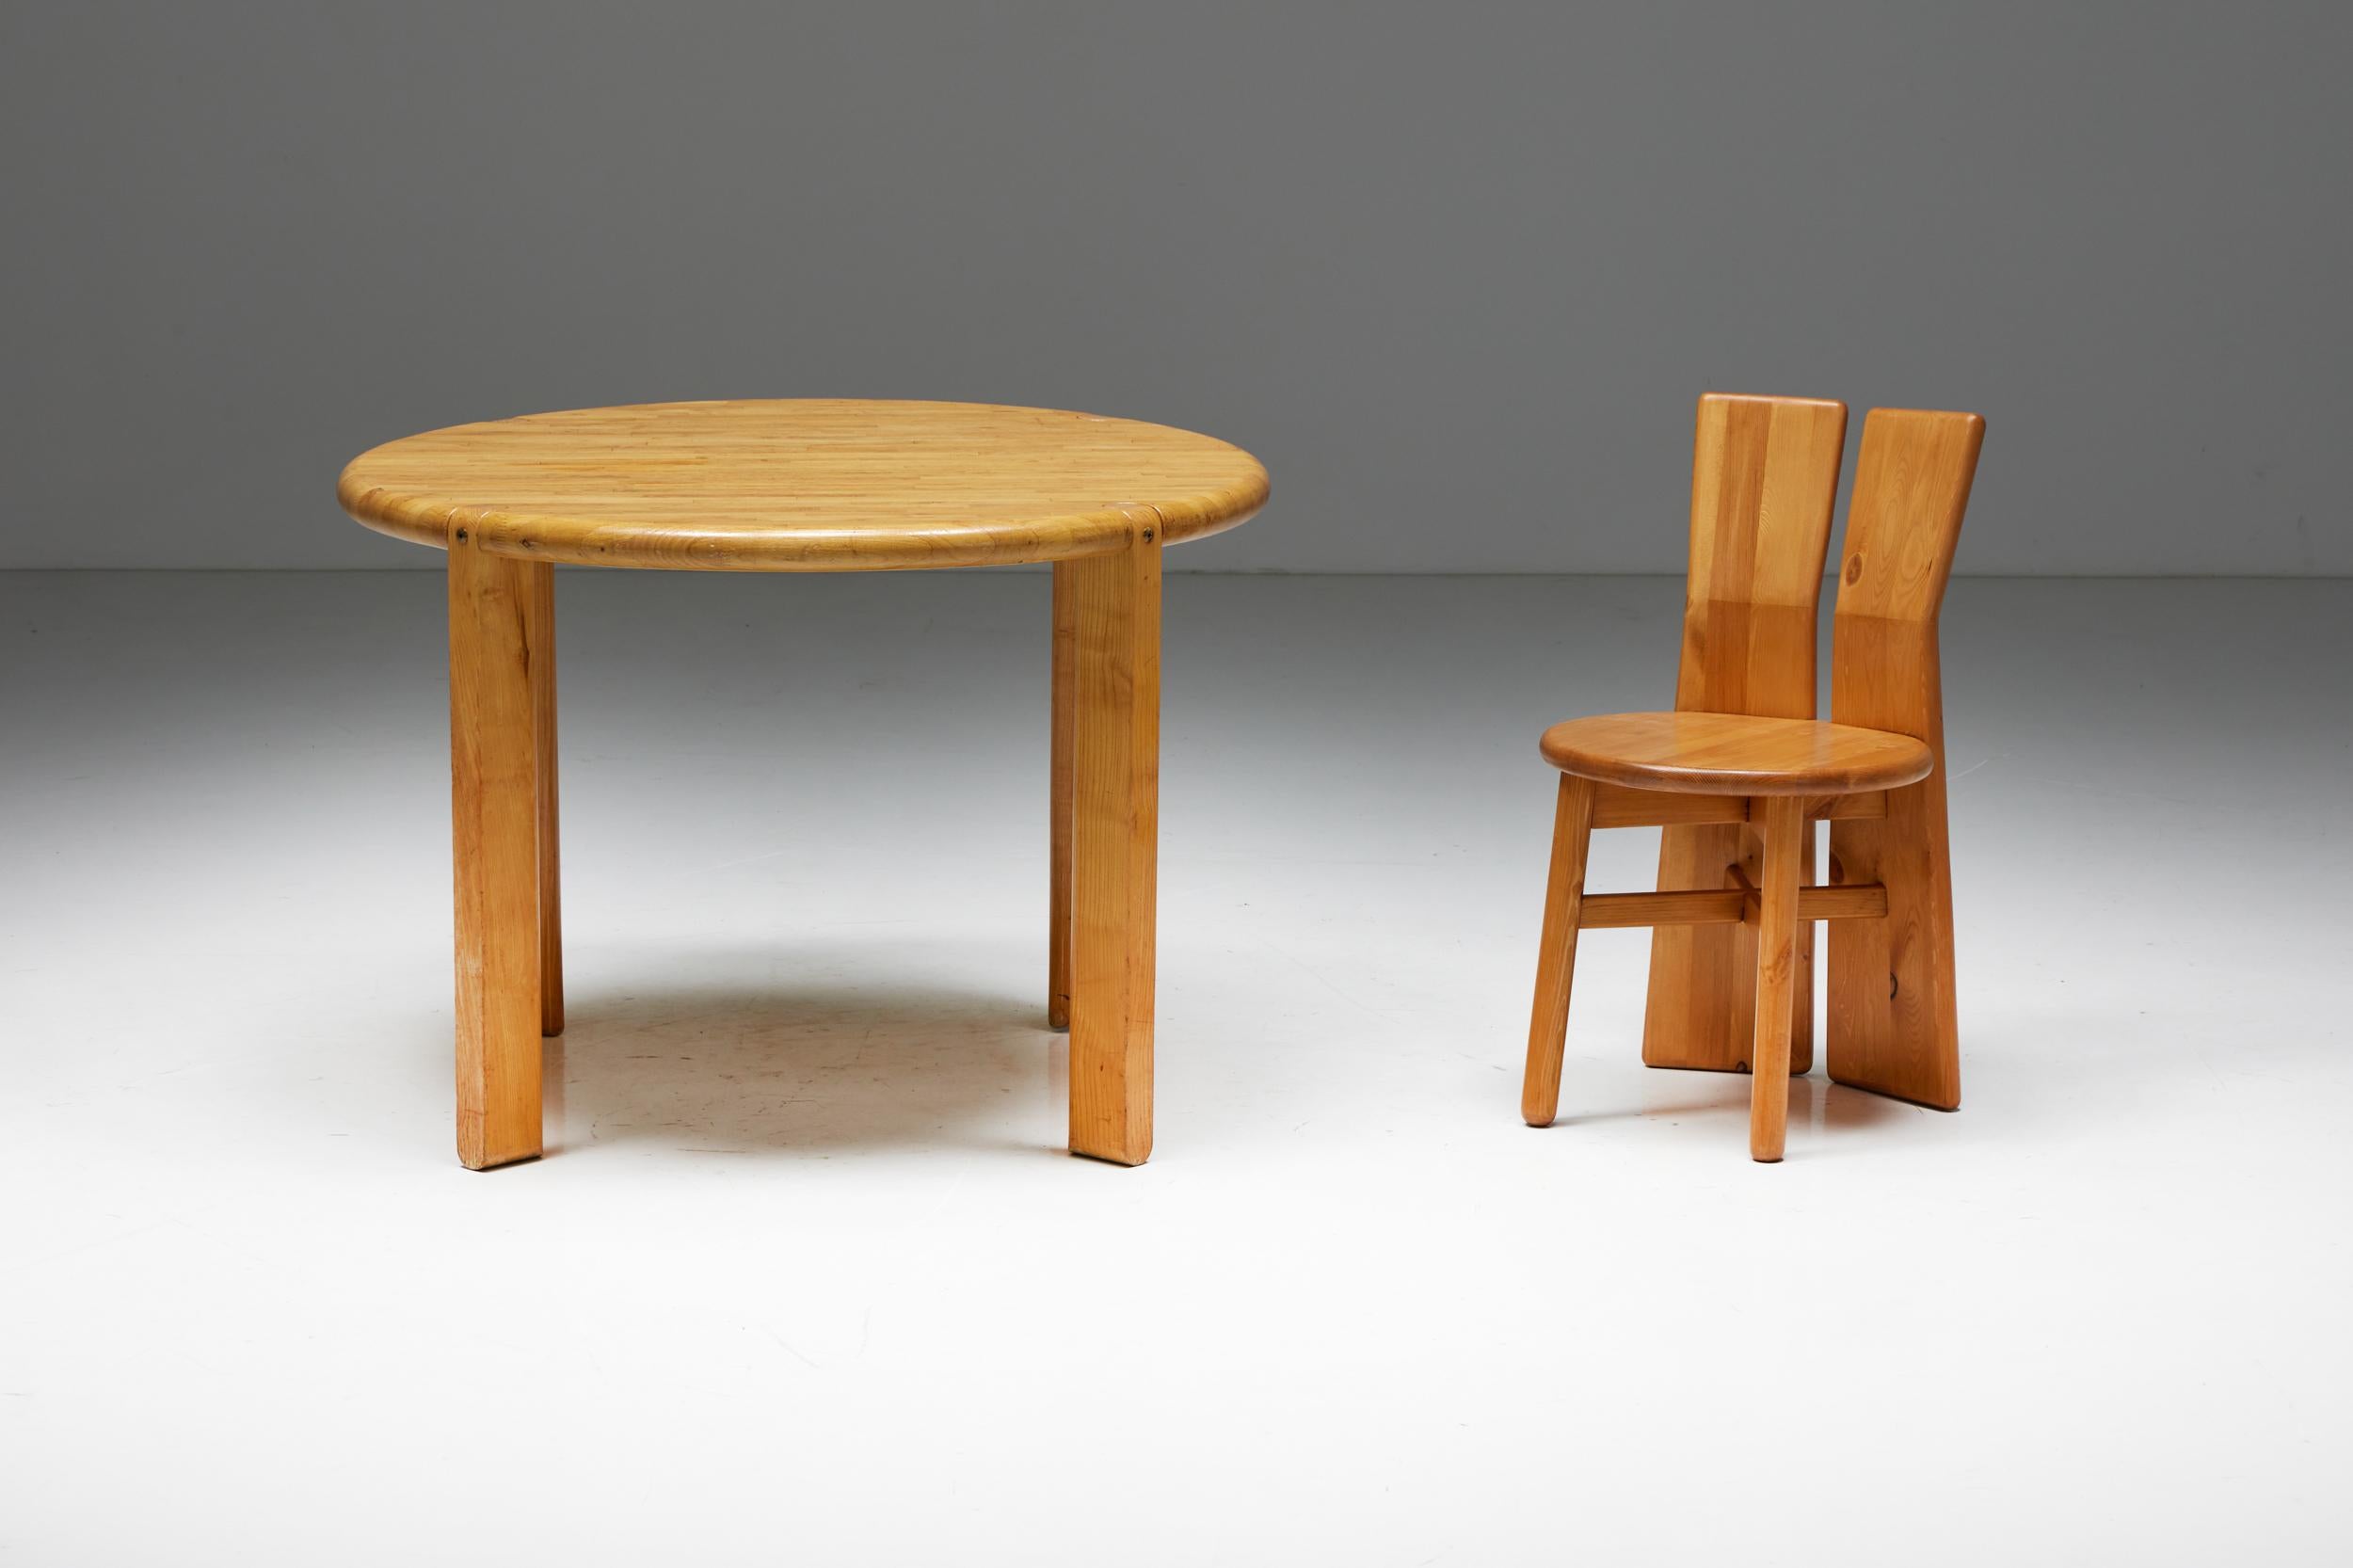 Italian Brutalist Pine Dining Chairs, Italy, 1970s For Sale 3